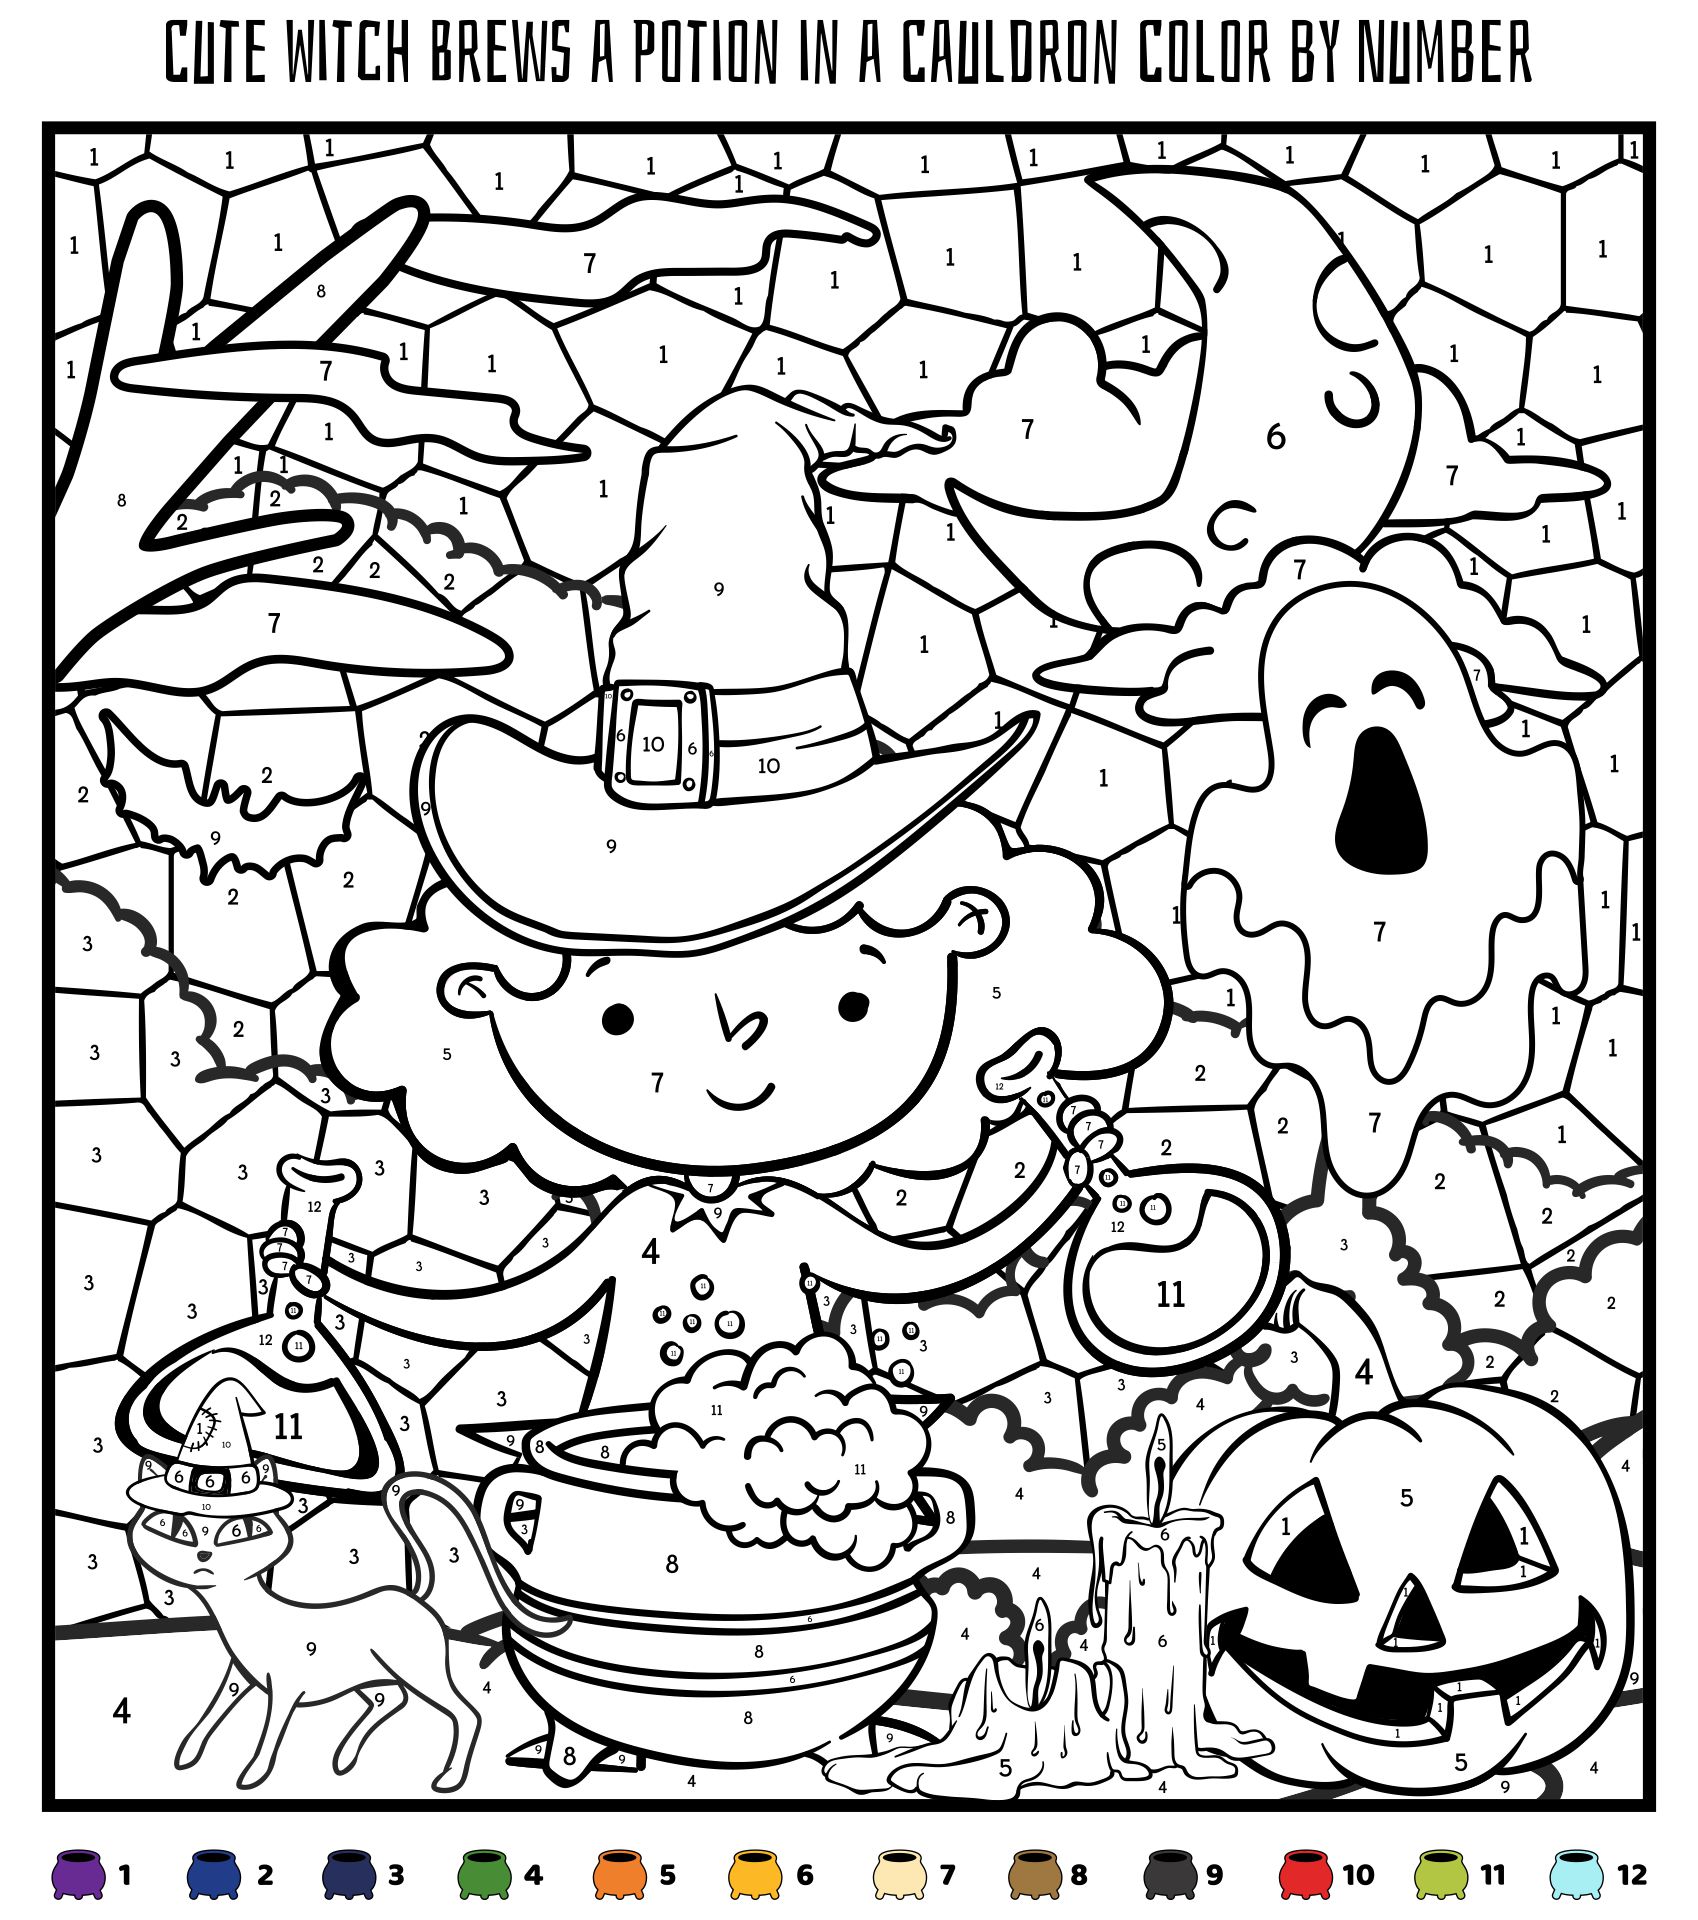 Cute Witch Brews A Potion In A Cauldron Color By Number Printable